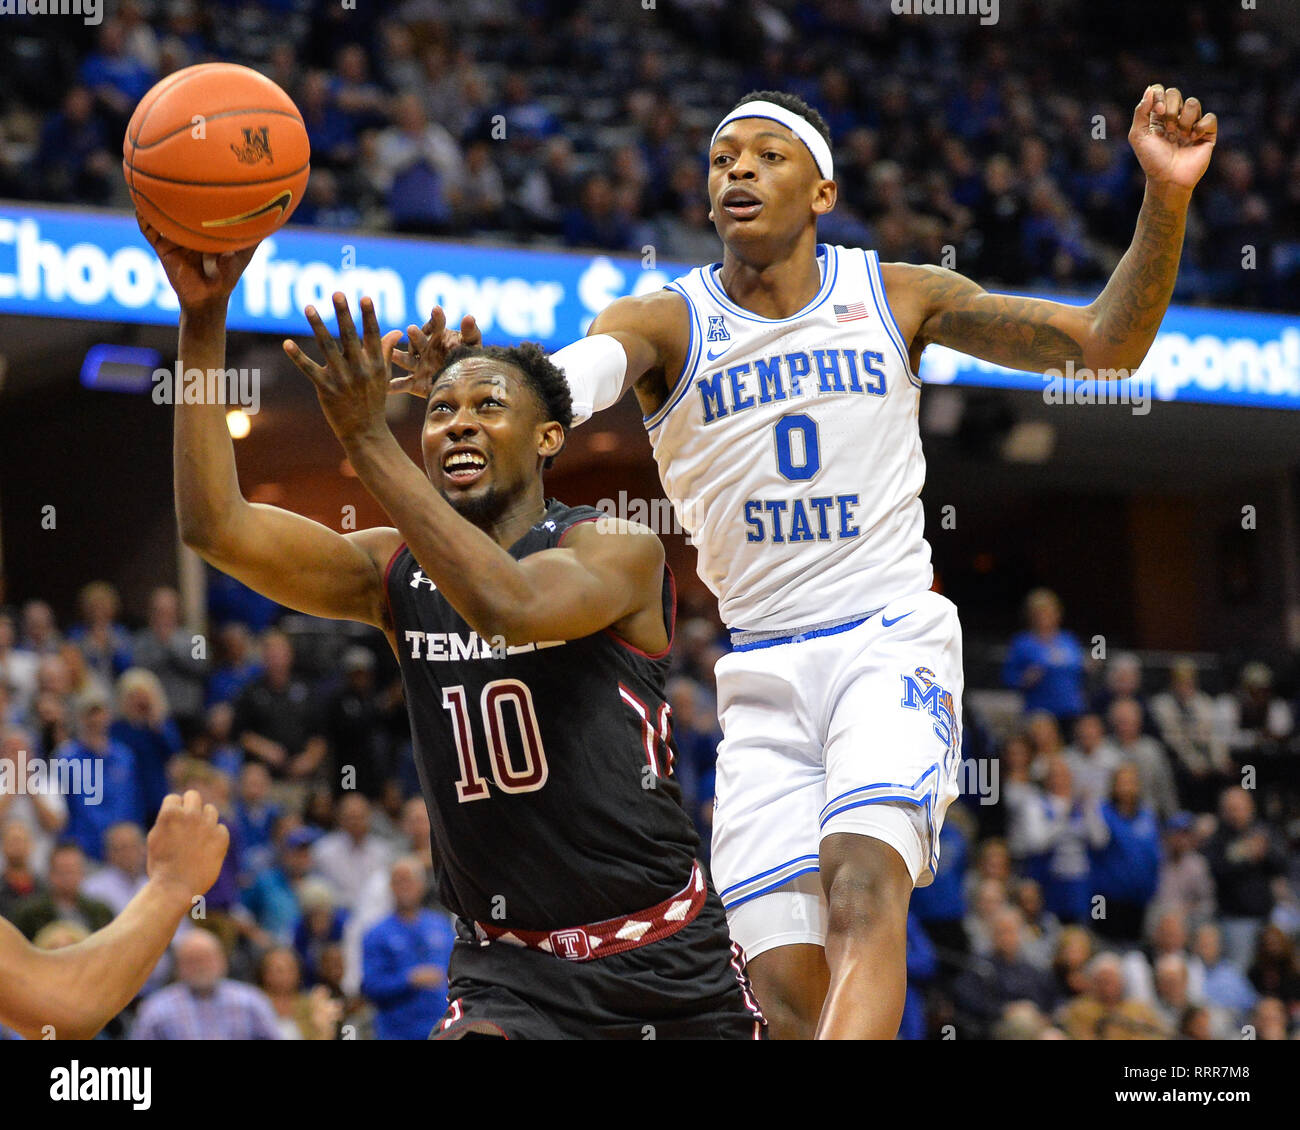 Memphis, TN, USA. 26th Feb, 2019. Temple guard, Shizz Alston Jr. (10), gets past Memphis forward, KYVON DAVENPORT (0), and heads for the basket, during the NCAA basketball game between the Temple Owls and the Memphis Tigers at the Fed Ex Forum in Memphis, TN. Memphis defeated Temple, 81-73. Kevin Langley/Sports South Media/CSM/Alamy Live News Stock Photo